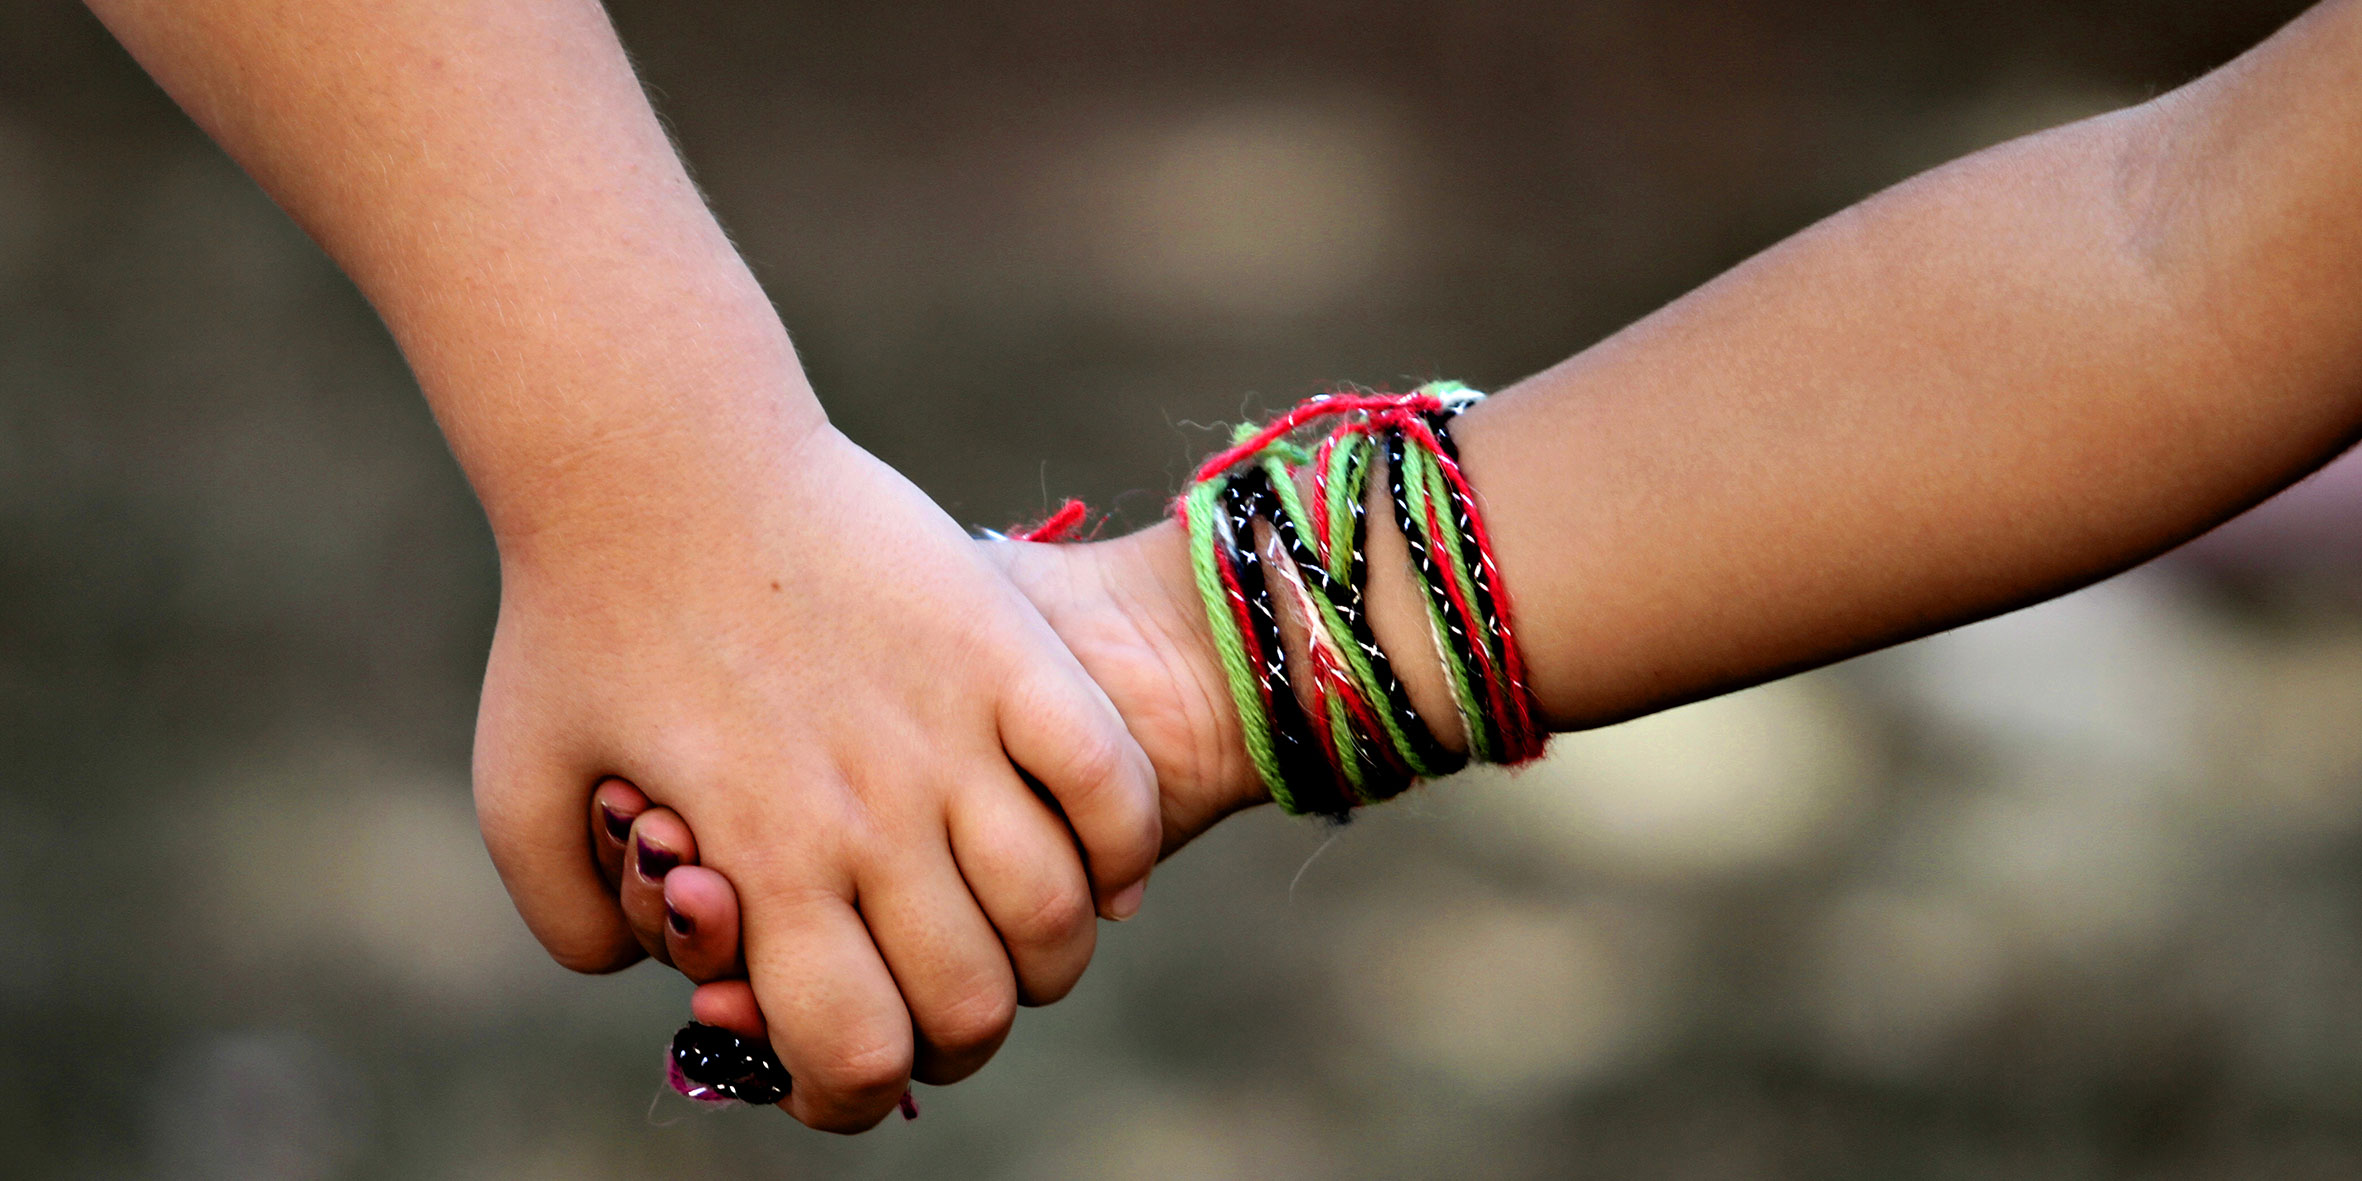 Two people holding hands, one can only see the hands. One of the people has colourful braces.